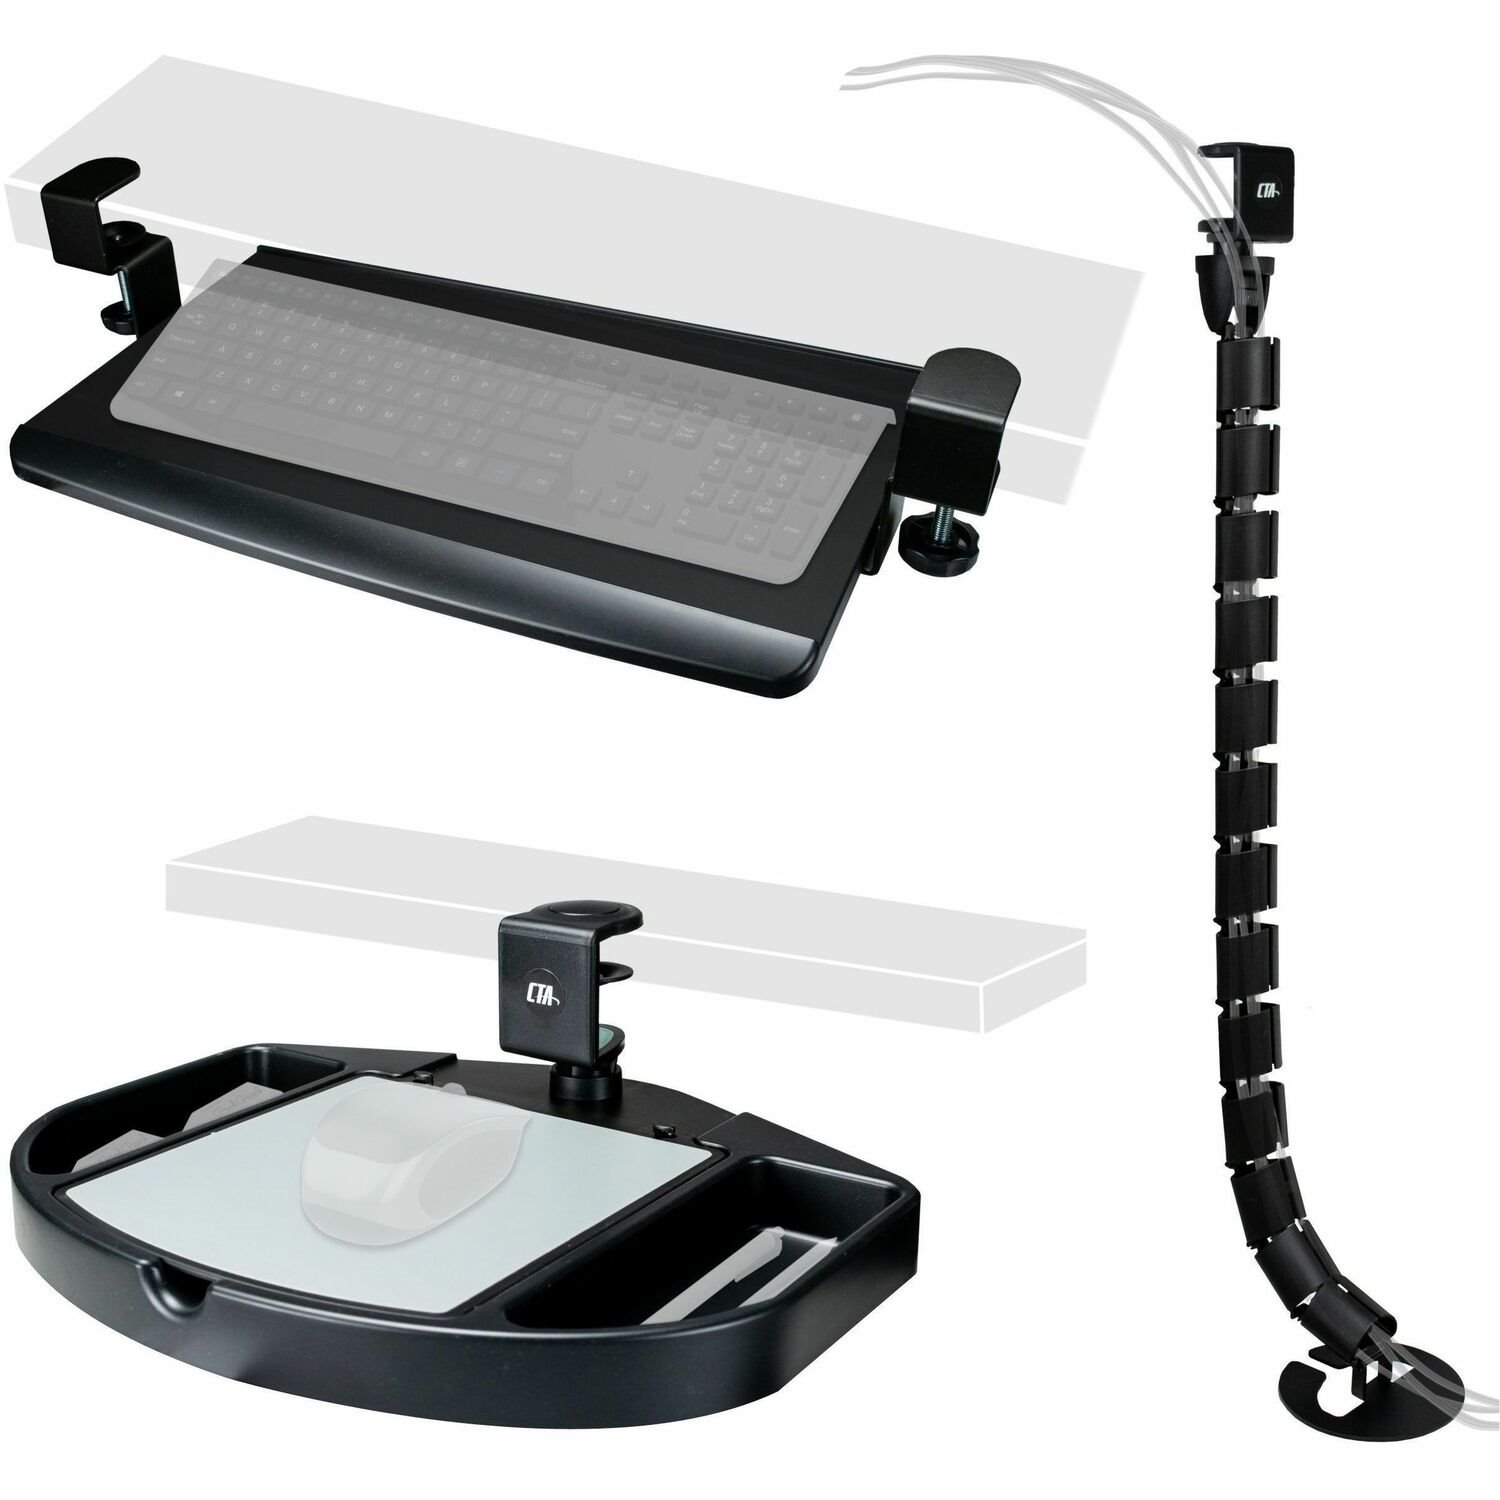 CTA Digital Desk Add-on Bundle with Keyboard Tray, Desk Organizer, and Cable Routing Column